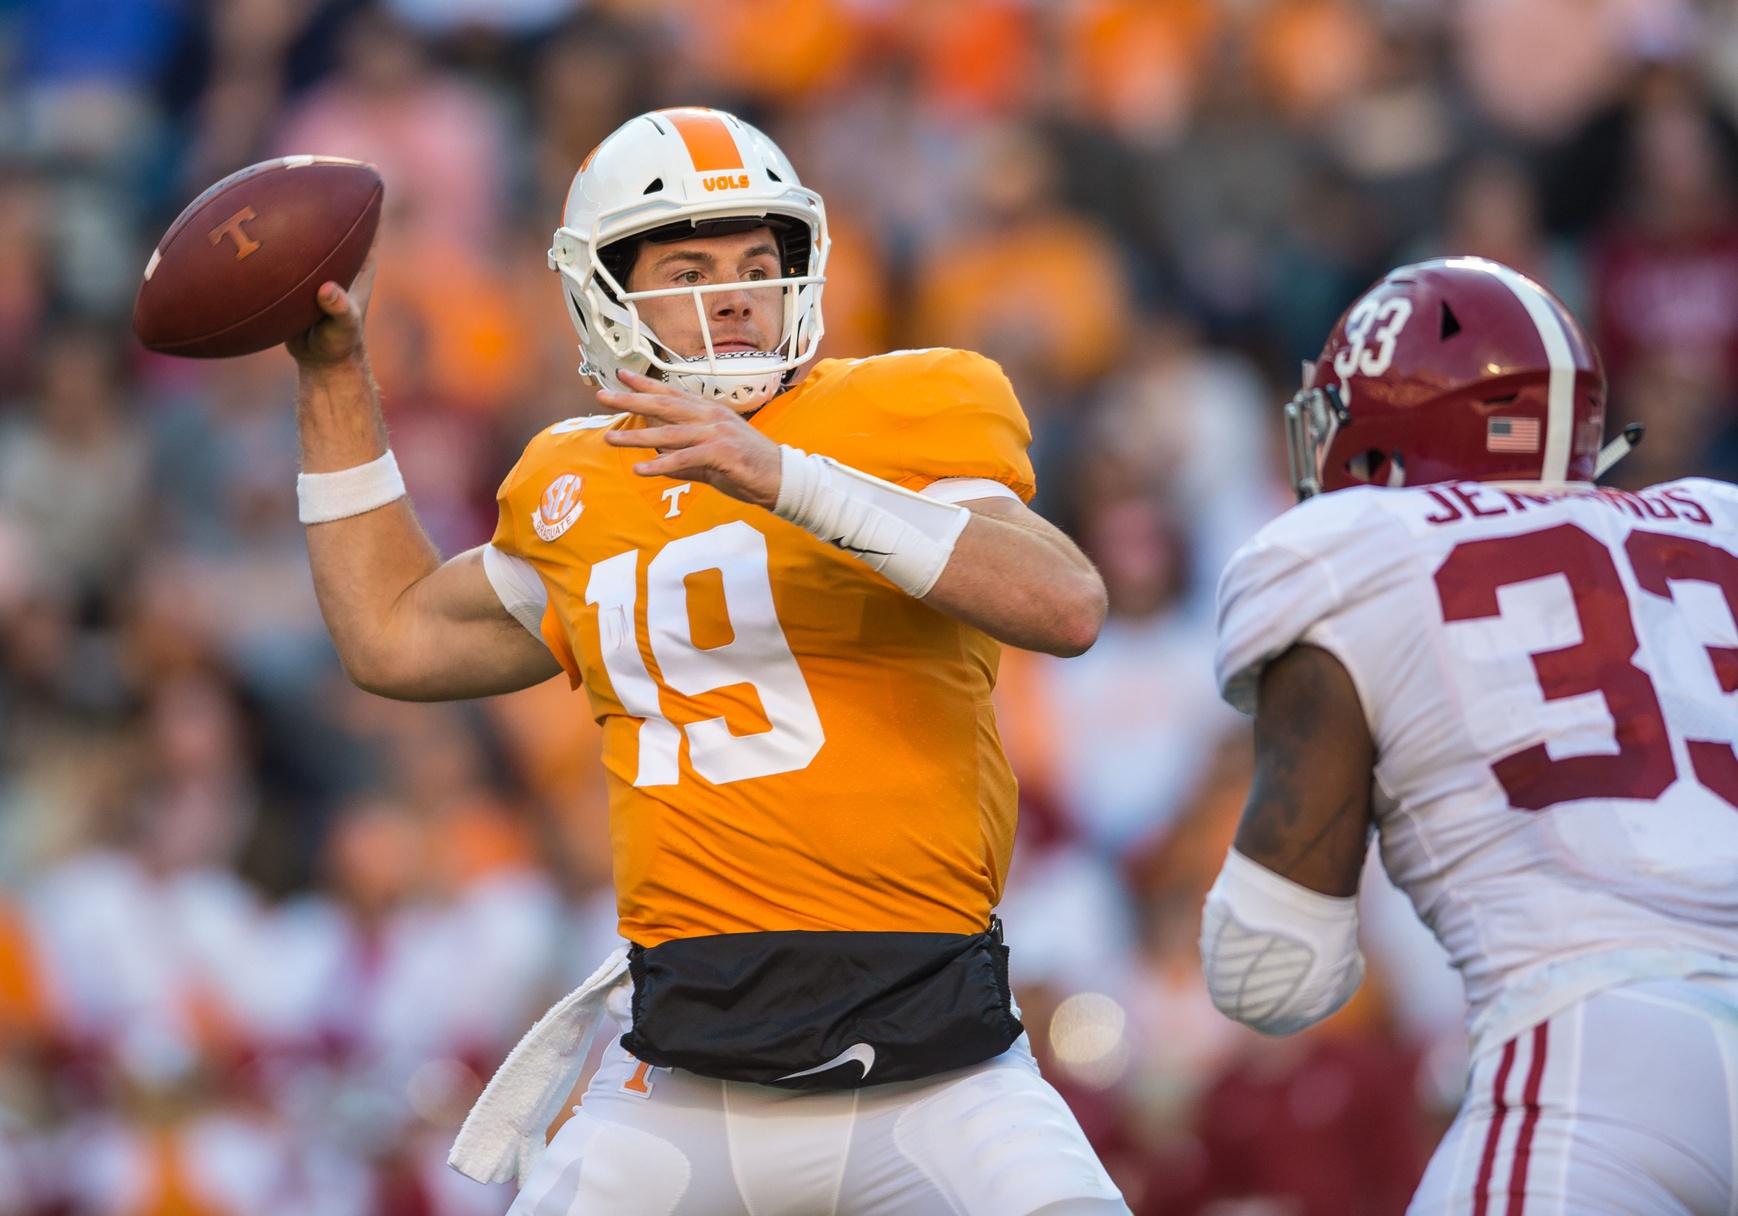 Keller Chryst is the Vols’ highest graded player by PFF